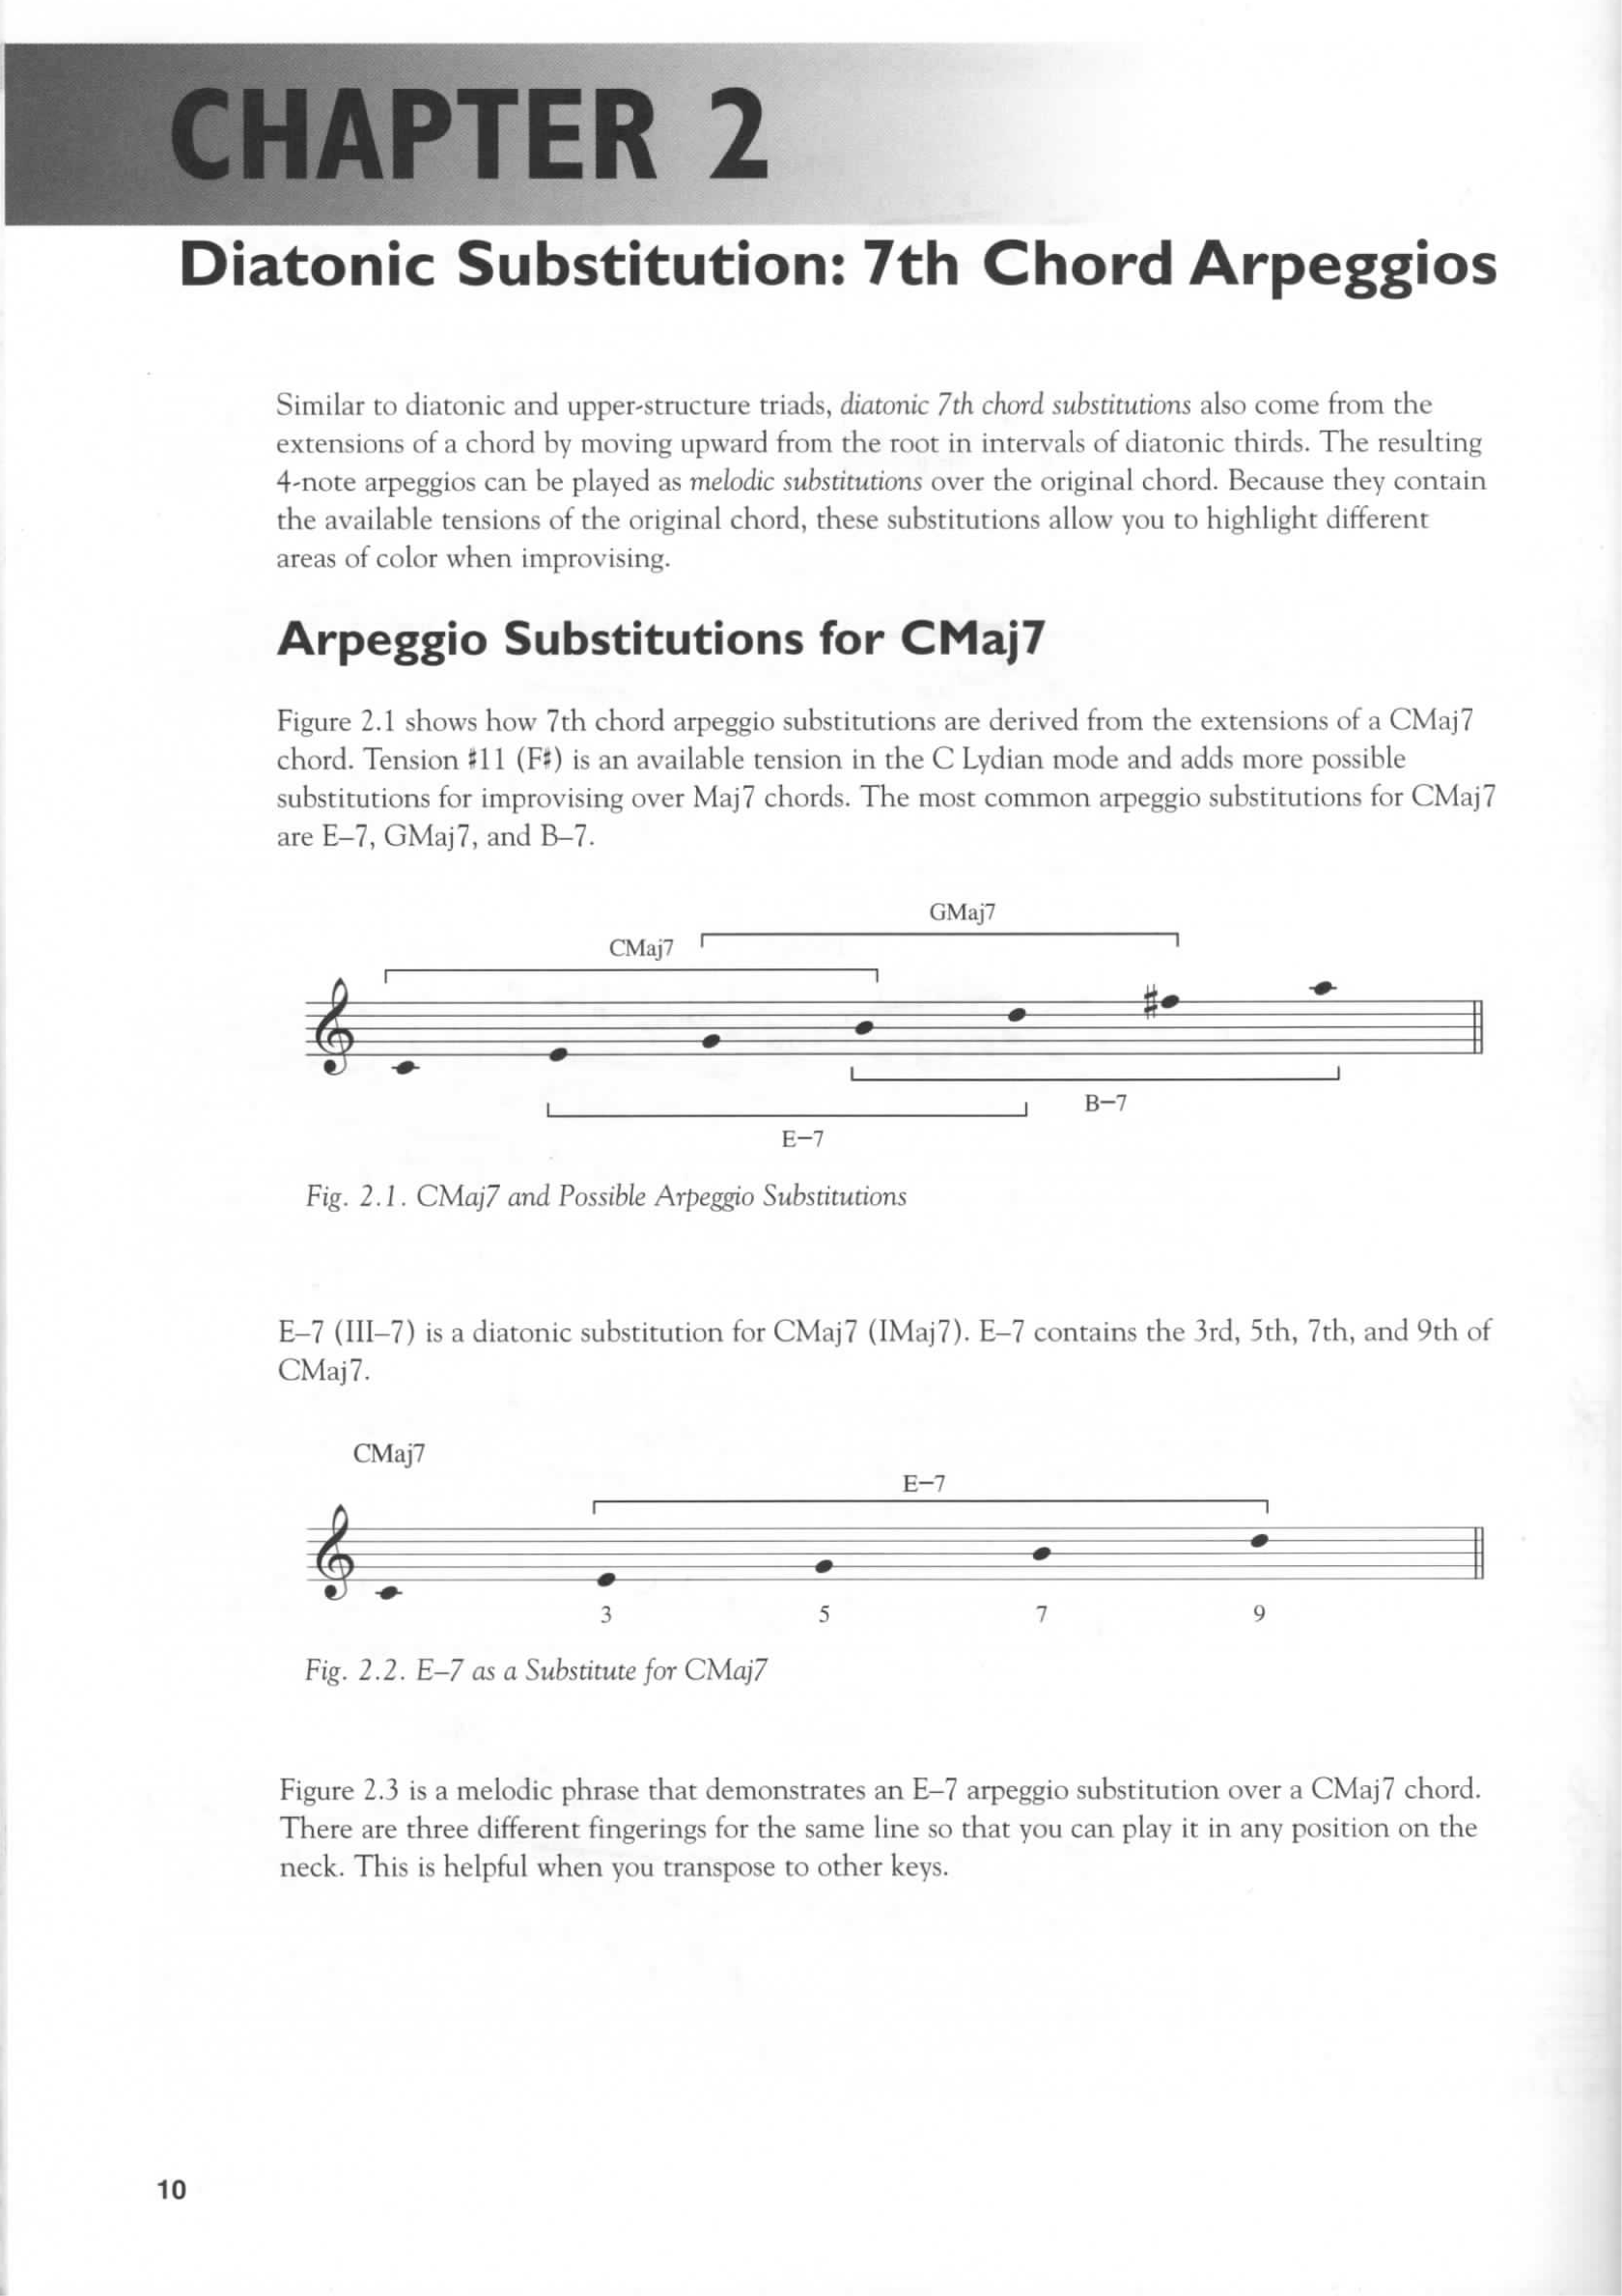 Chapter 2 - Diatonic Substitution 7th Chord Arpeggios - photo 19